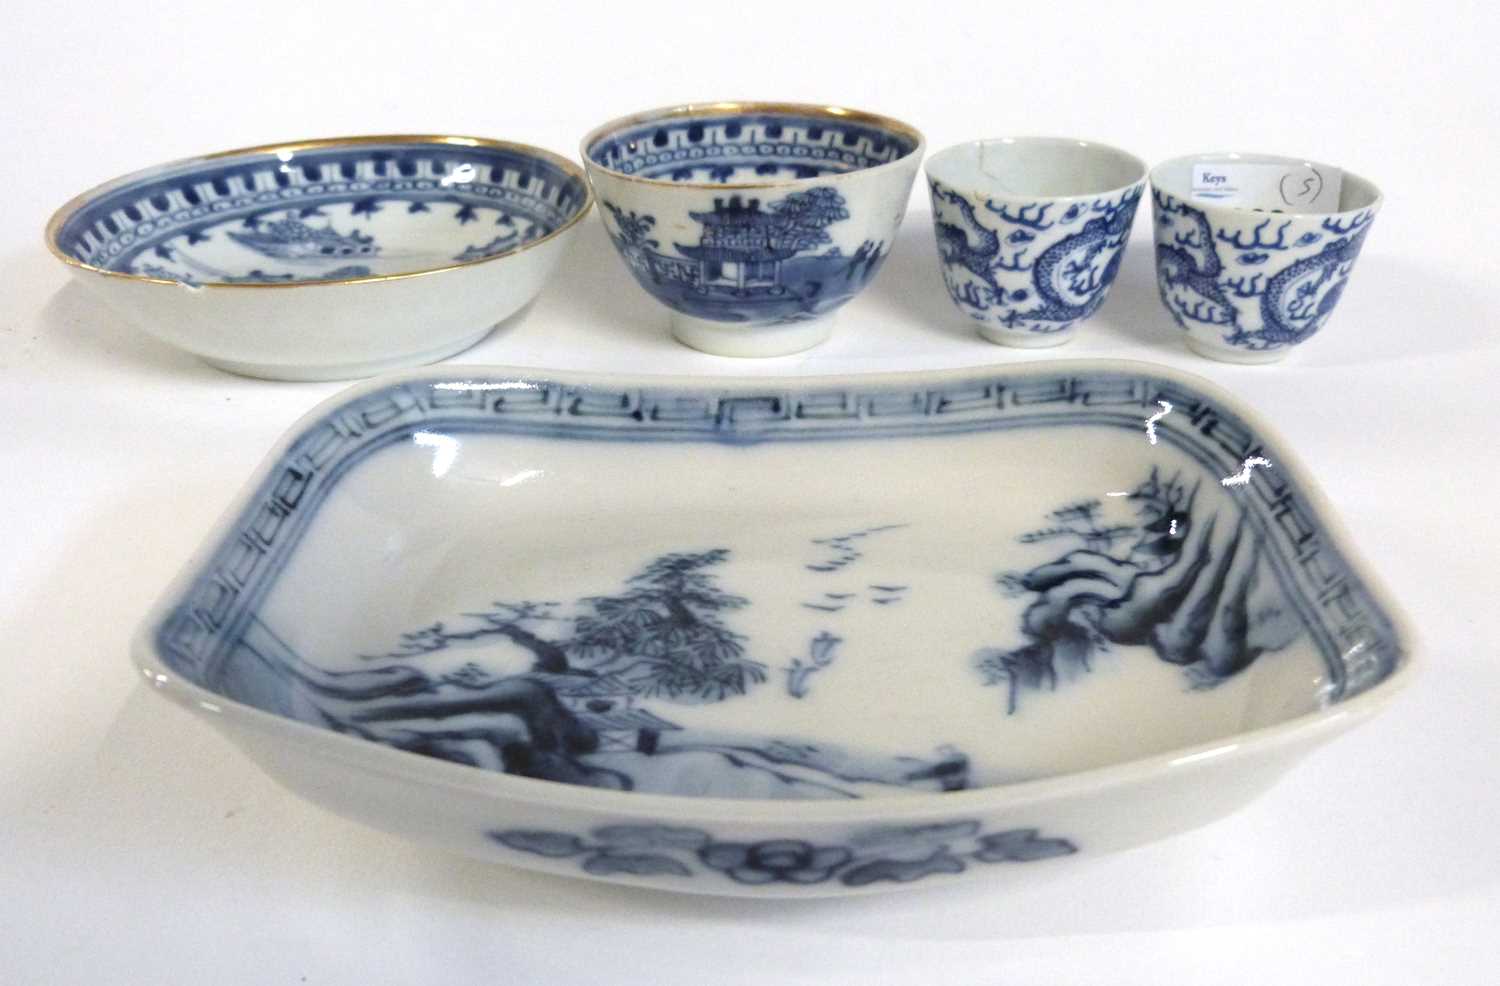 A group of 18th/19th Century Chinese tea wares including a tea bowl and saucer, small dish, two